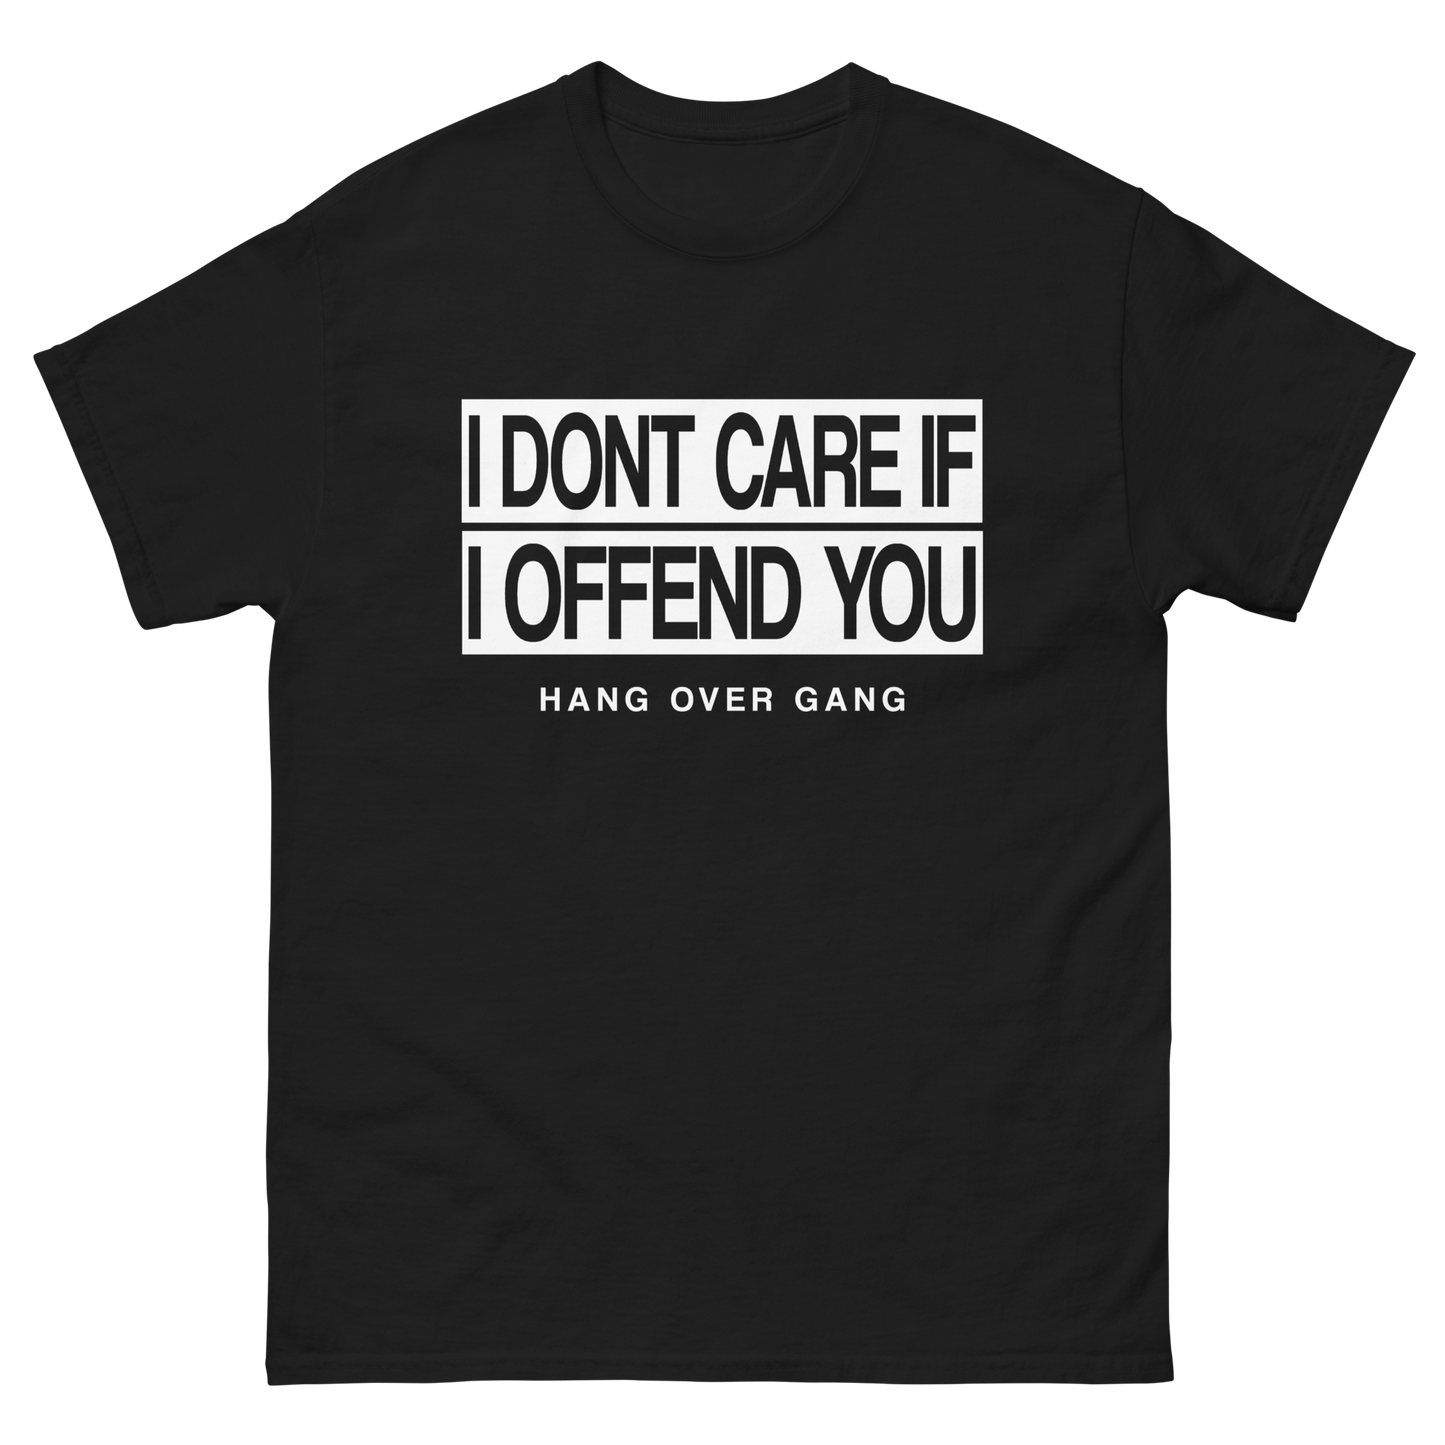 "I Dont Care If I Offend You" T-Shirt